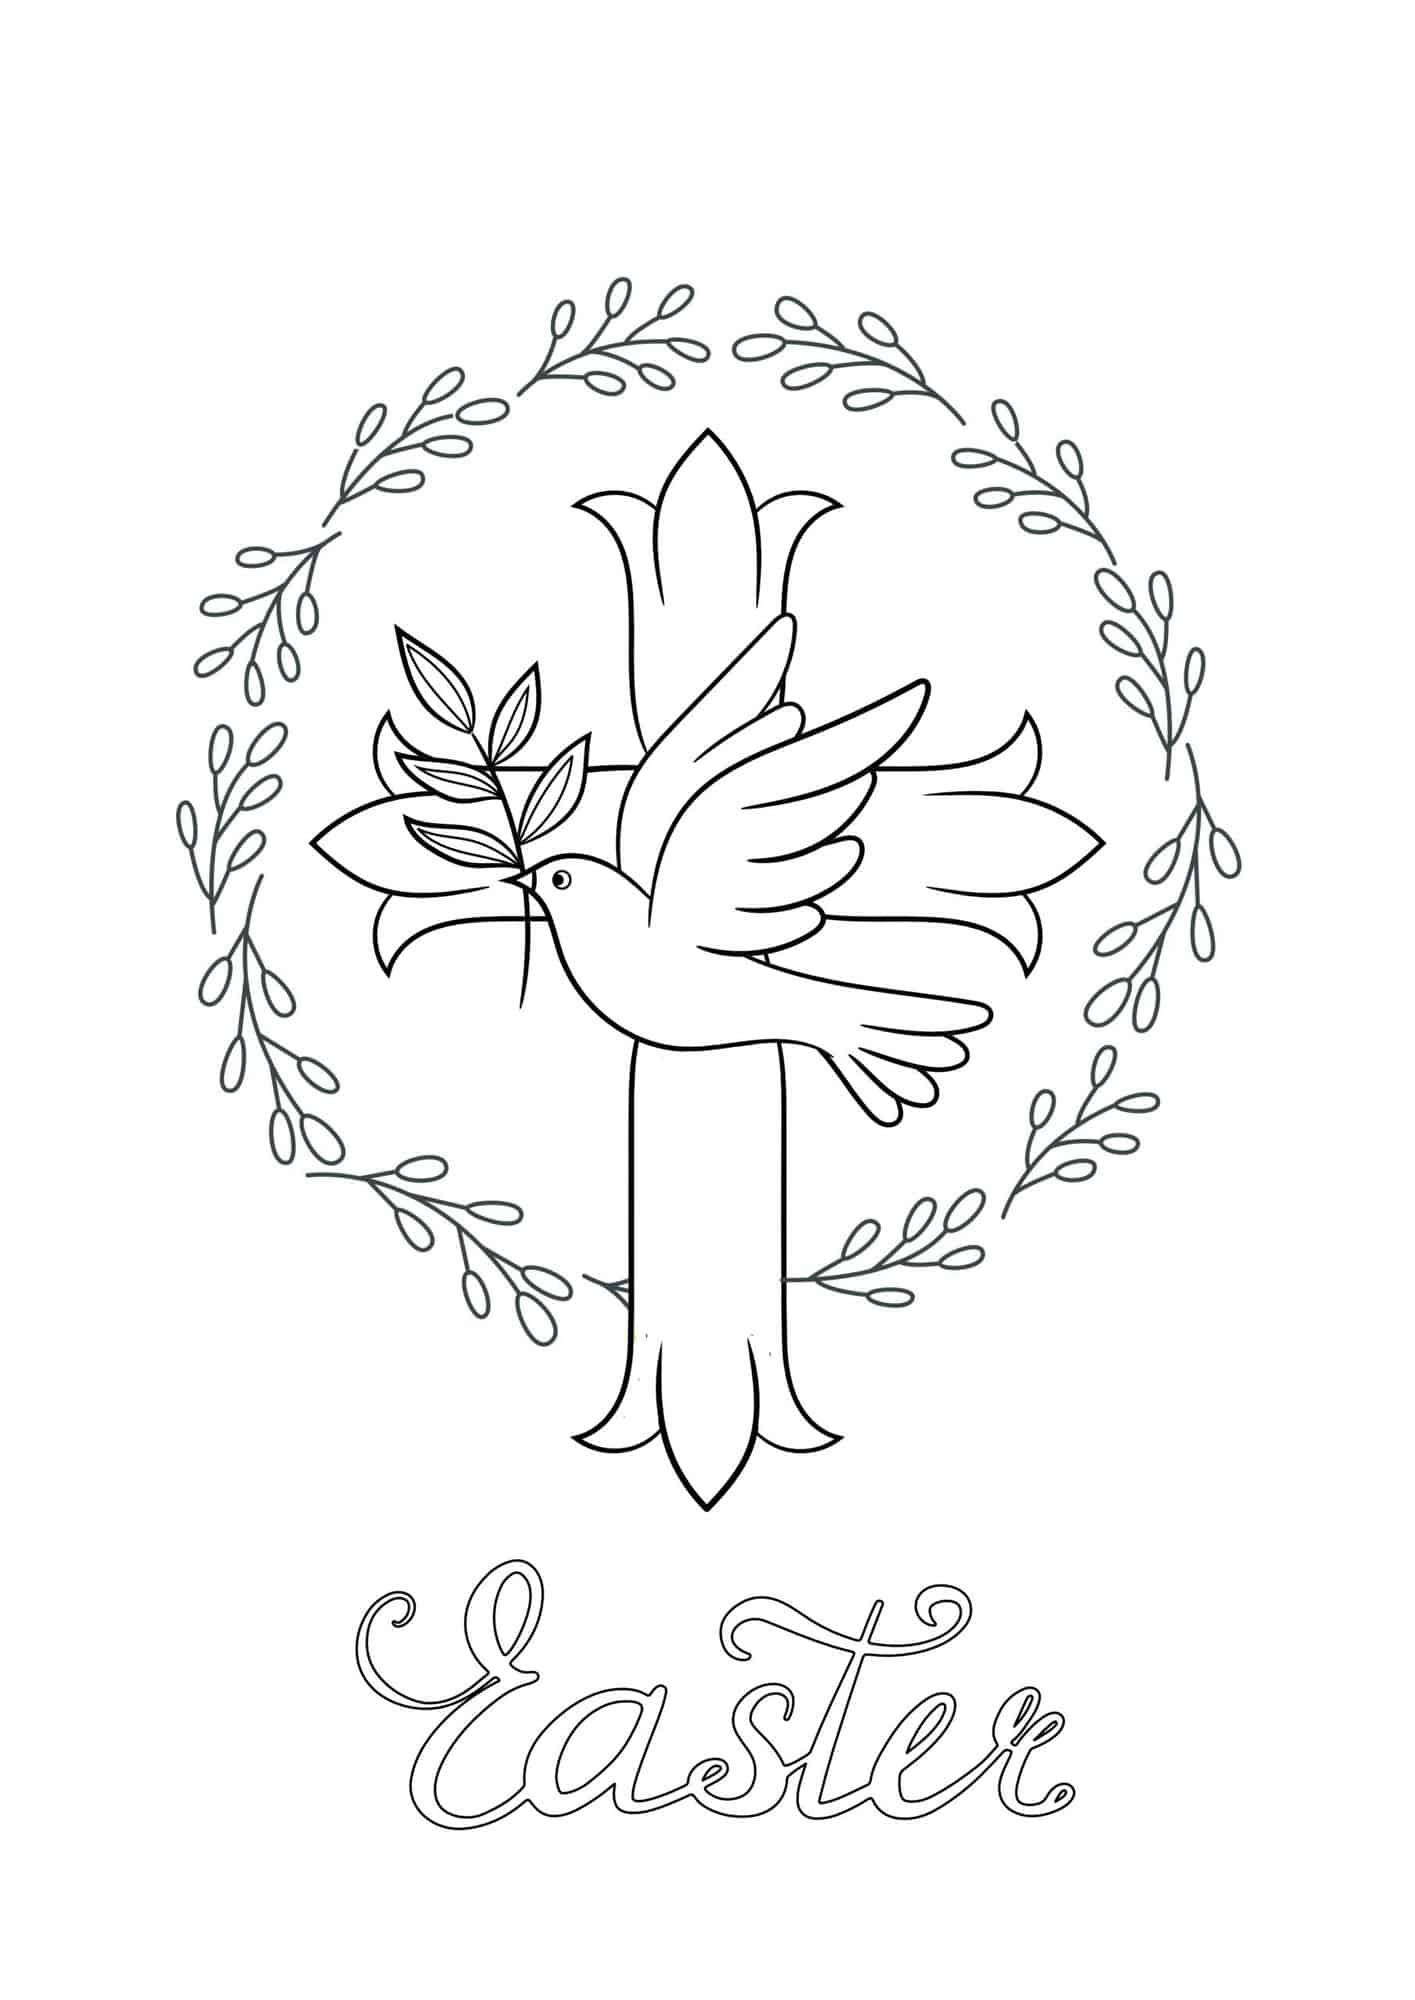 Easter dove template with a dove against a cross backdrop and a round leaf wreath.